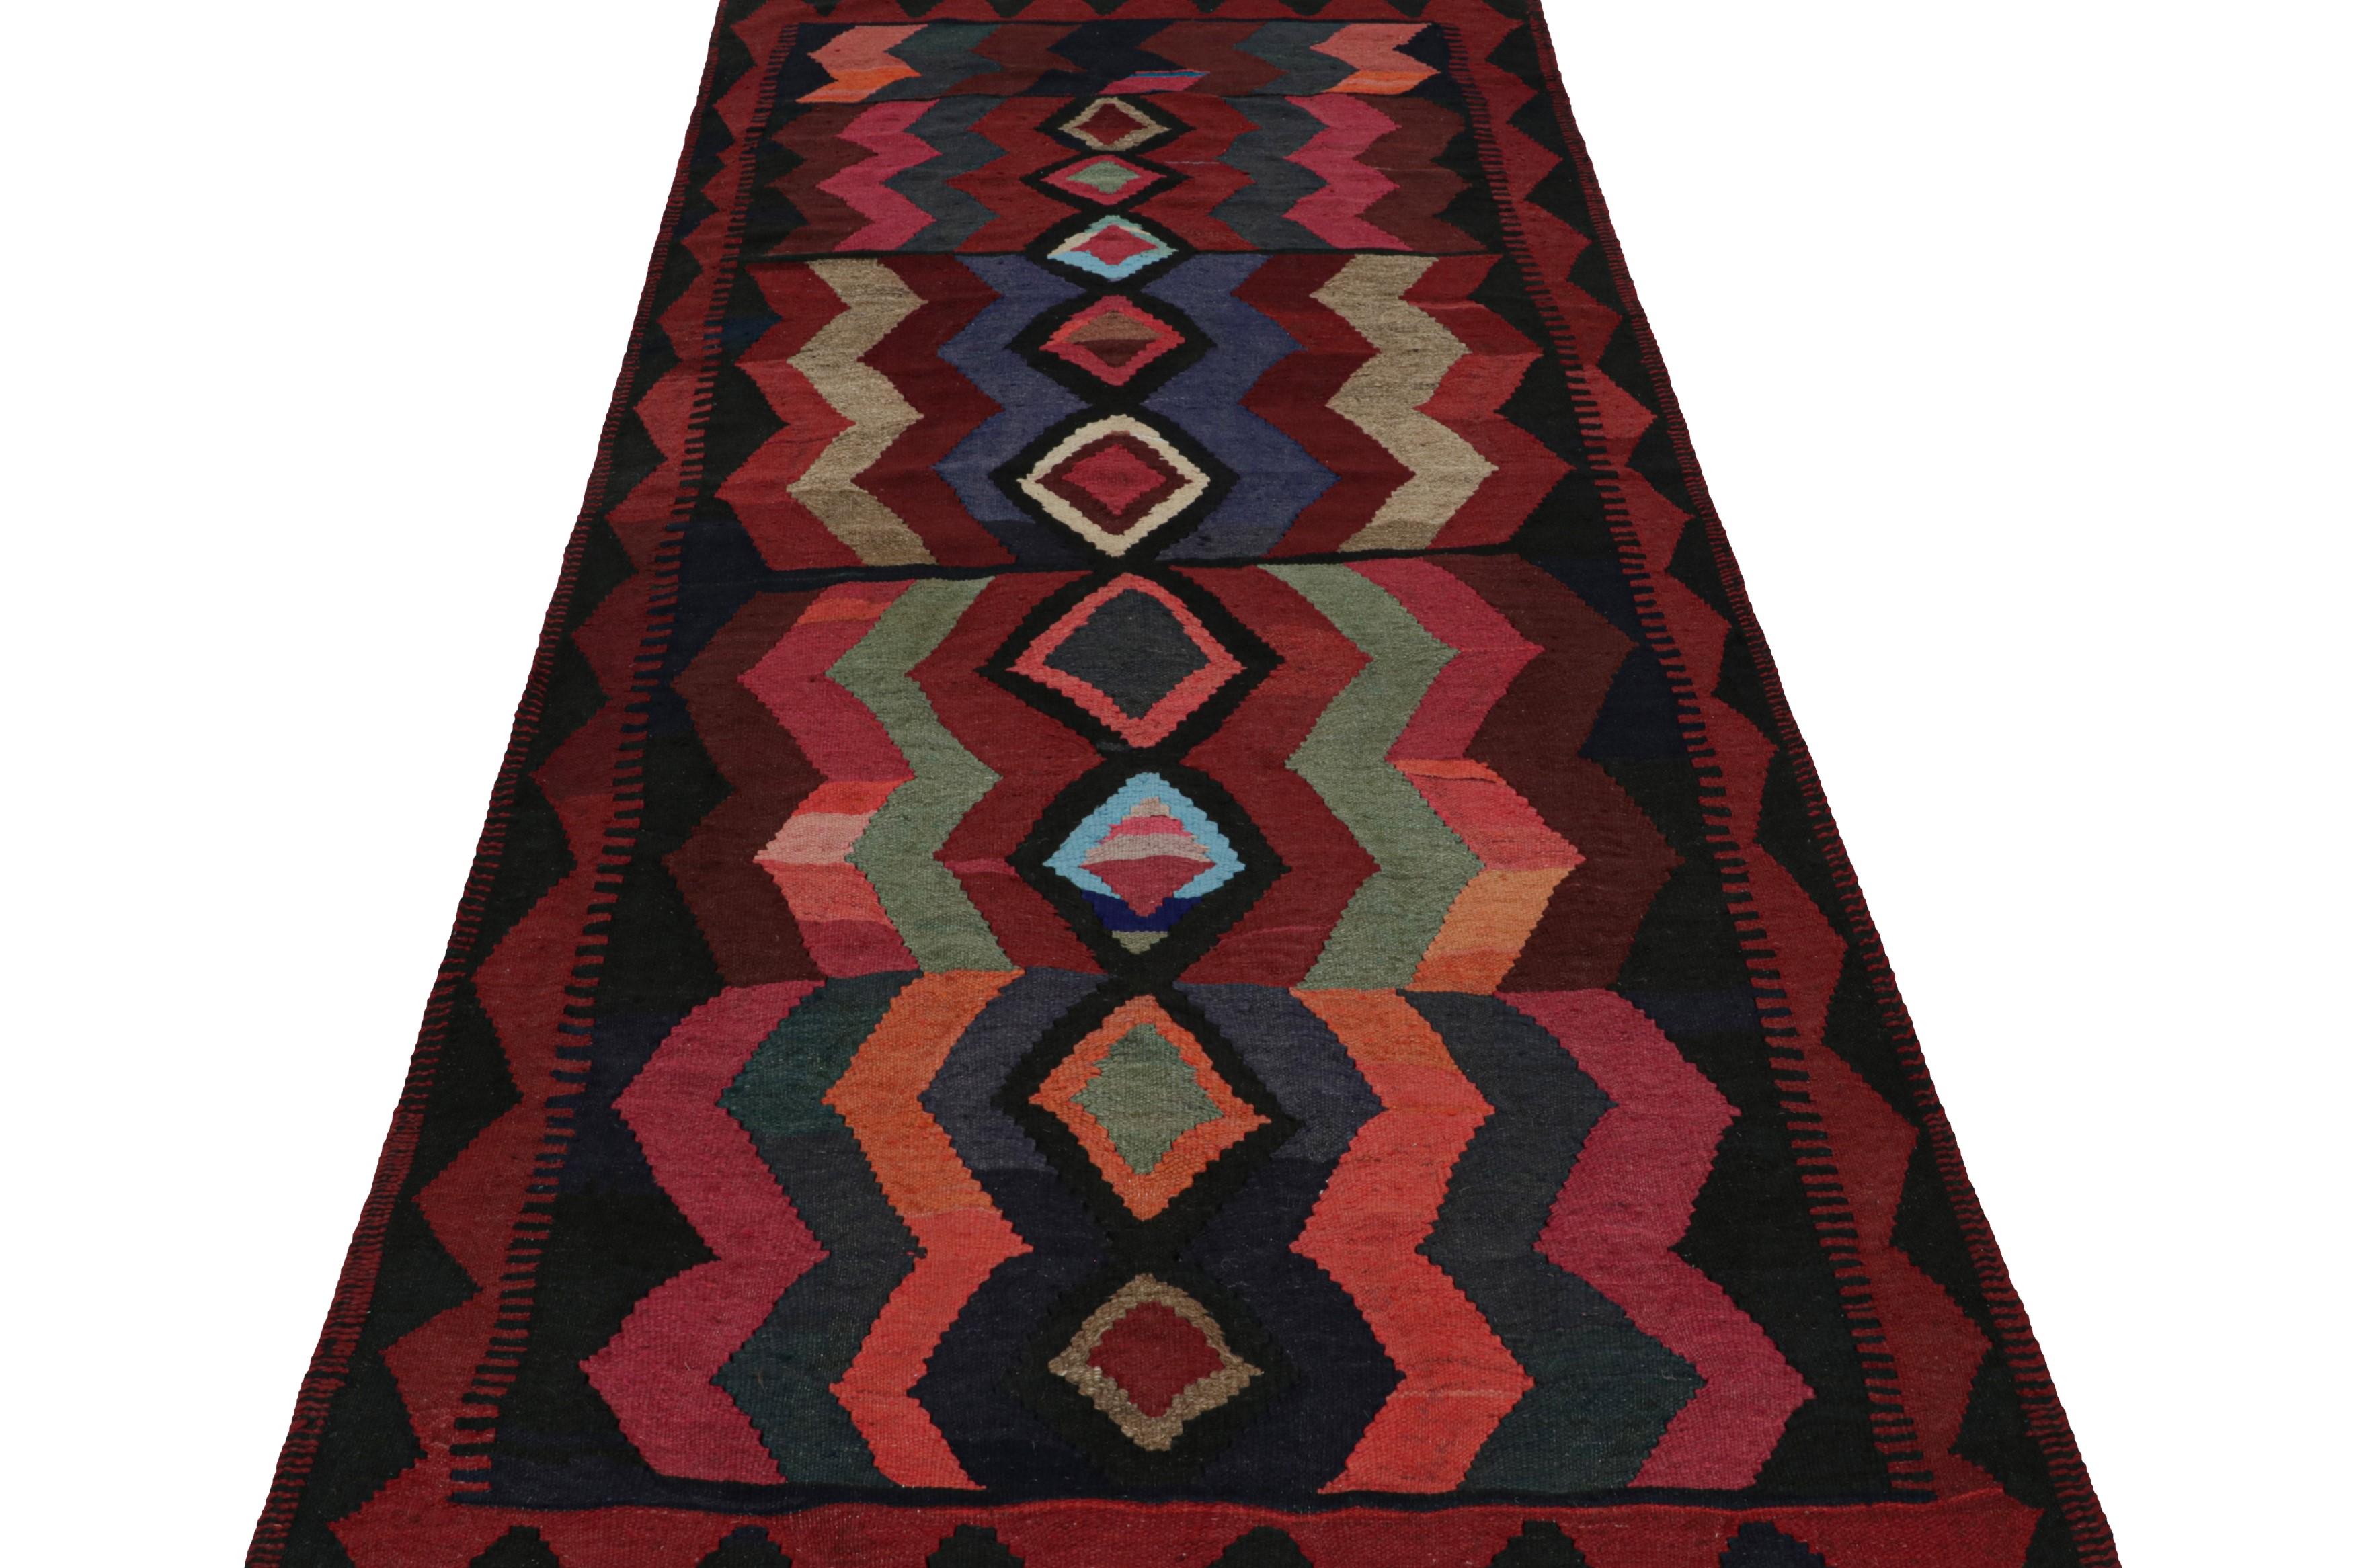 Hand-Woven Vintage Afghan Tribal Kilim in Polychromatic Geometric Patterns by Rug & Kilim For Sale